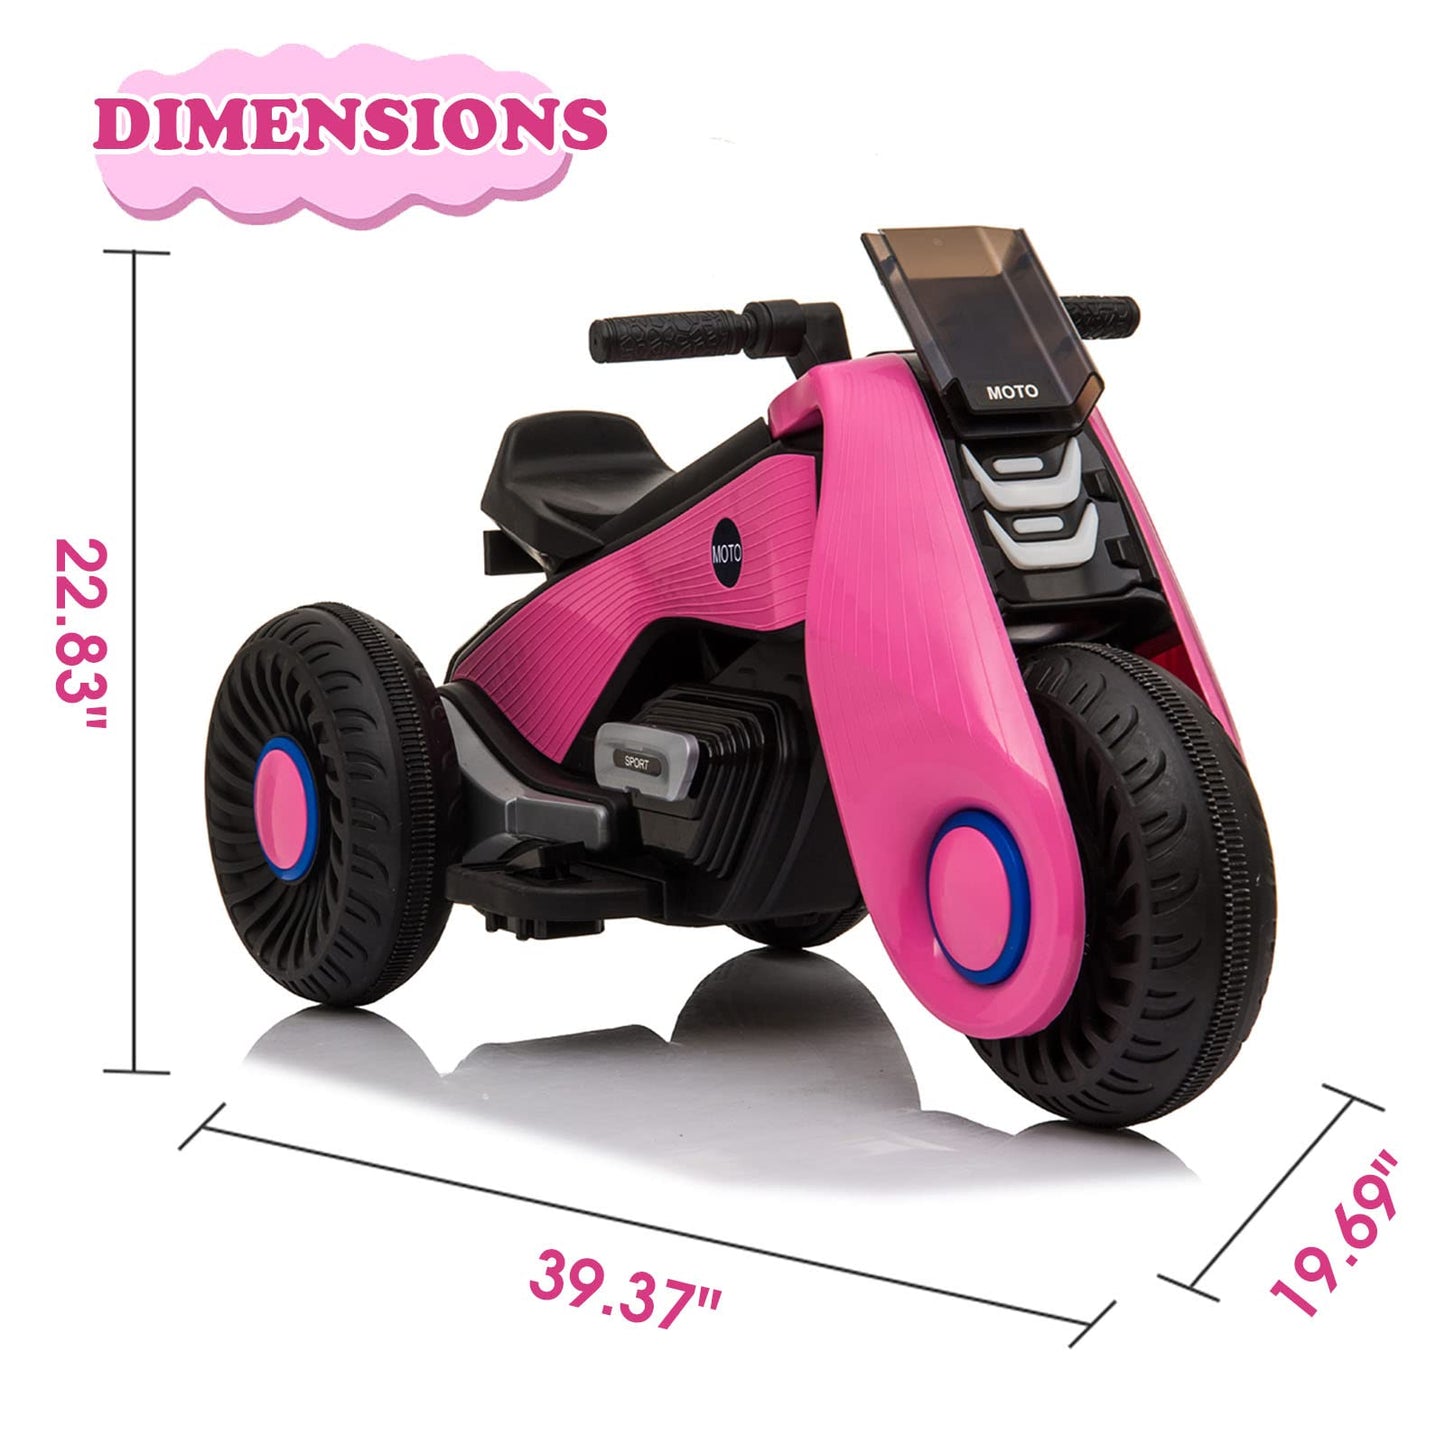 BELANITAS Kids Motorcycle Ride On, 3 Wheel Electric for Over Years Old, Double Drive Toddler with Music Player and Light, Motor Boys & Girls to on, Pink, Pink(motorcycle)